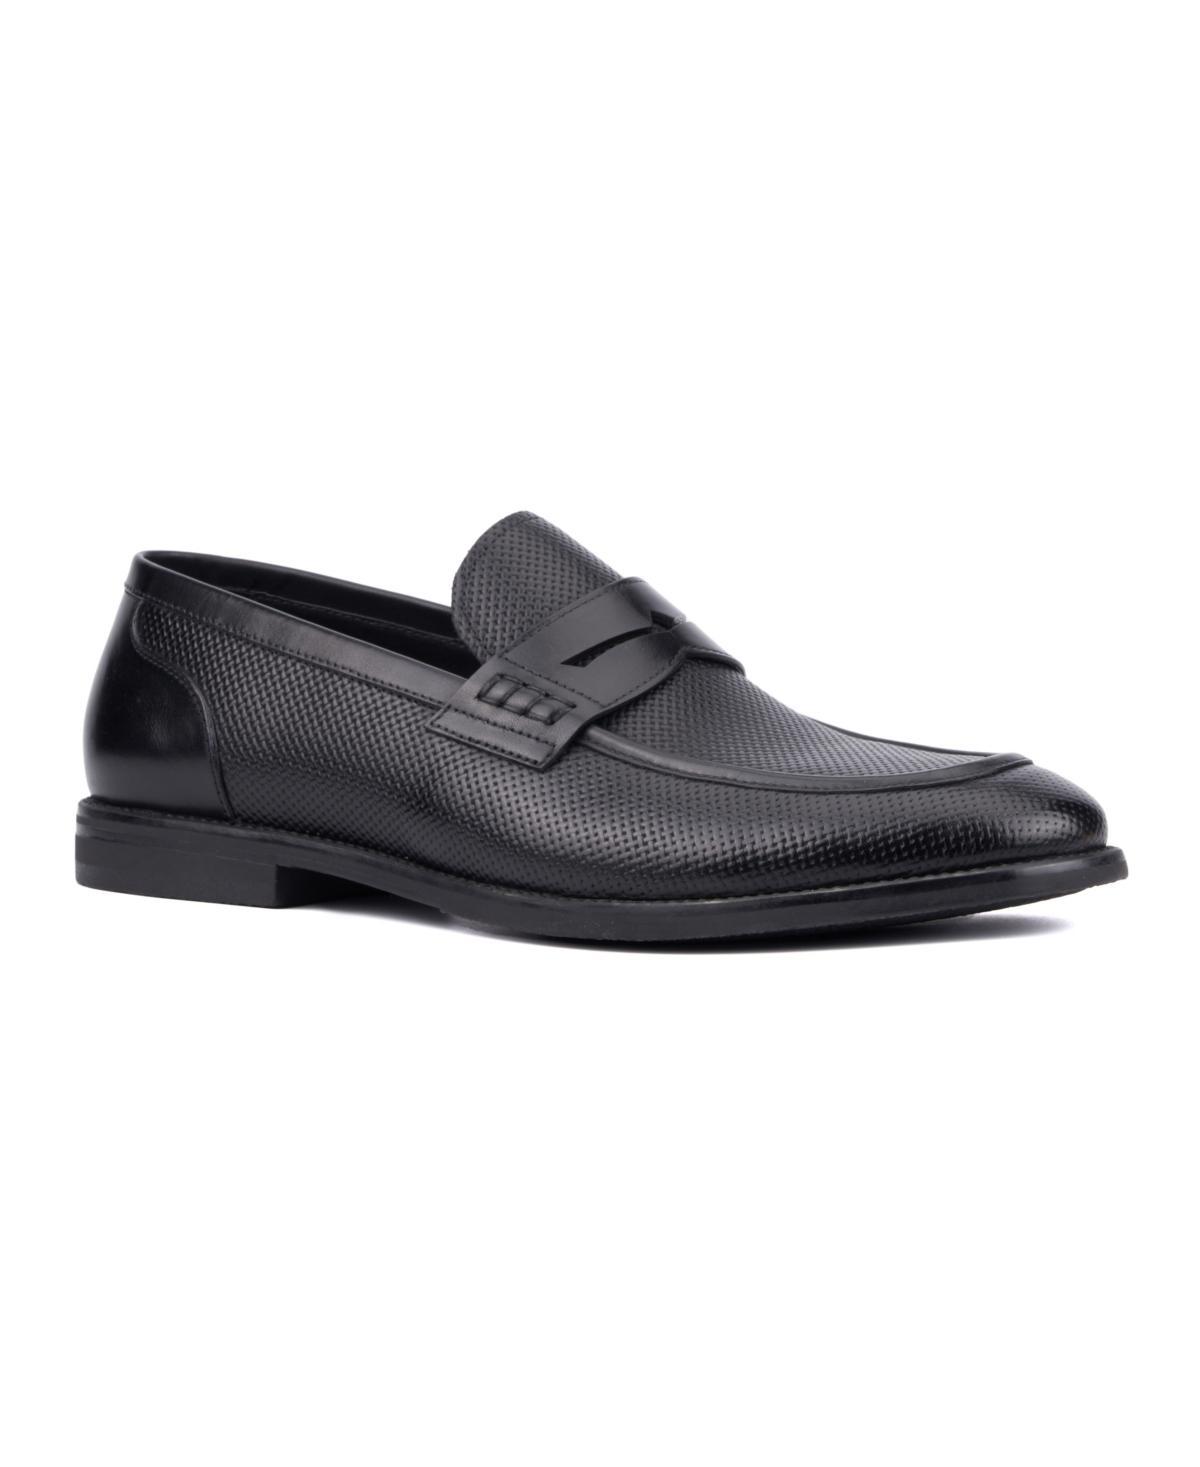 Men's Andy Dress Loafers Product Image